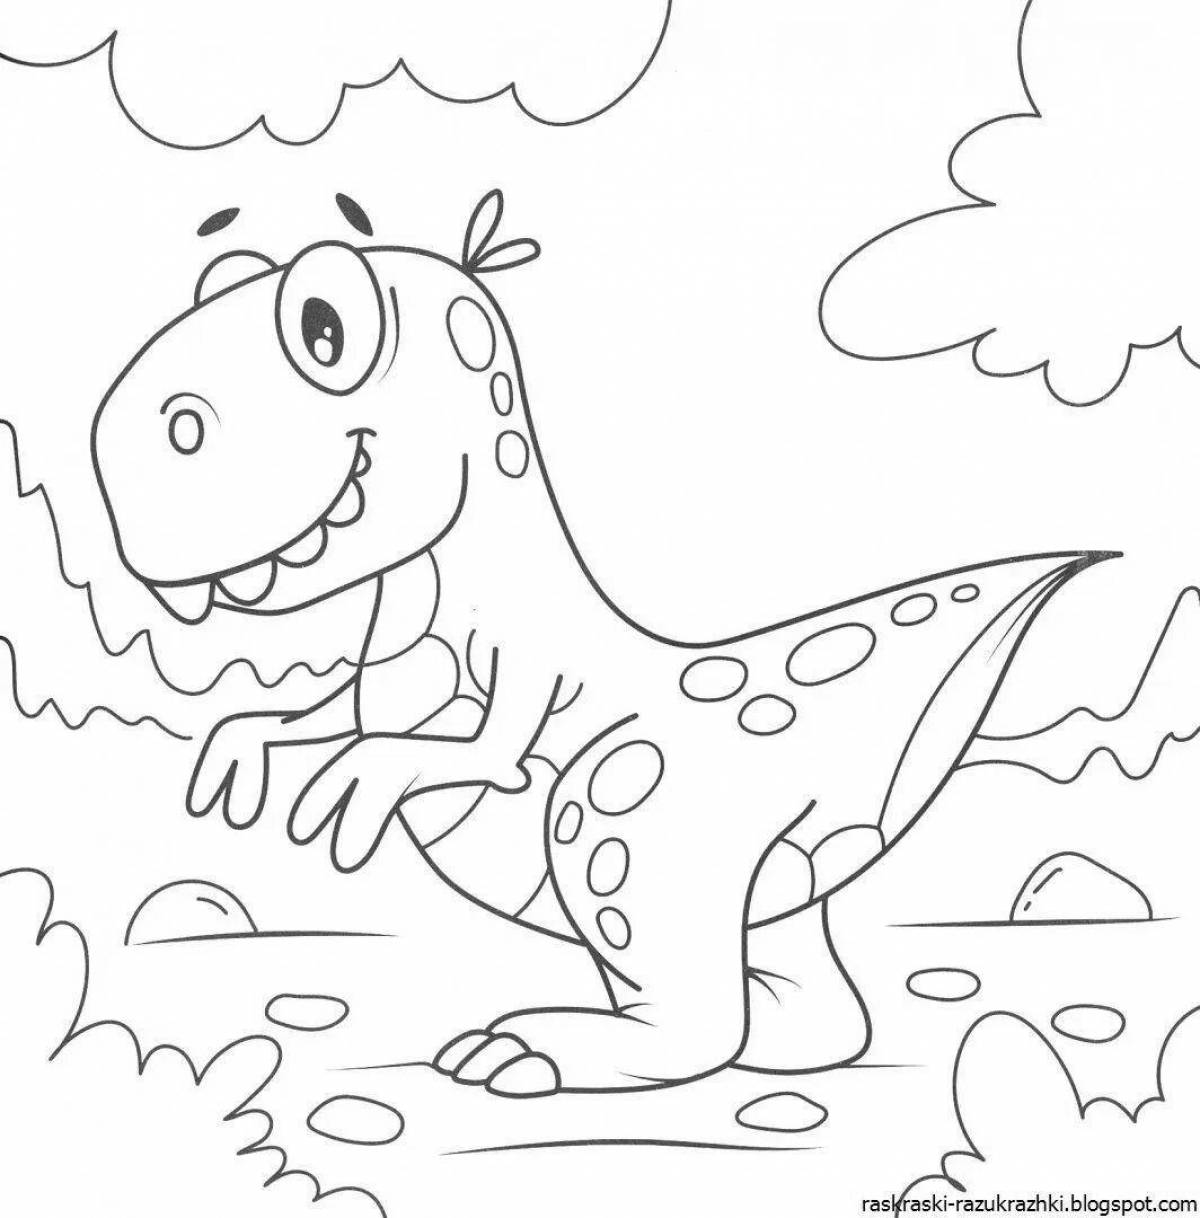 Coloring pages with playful dinosaurs for 3-4 year olds